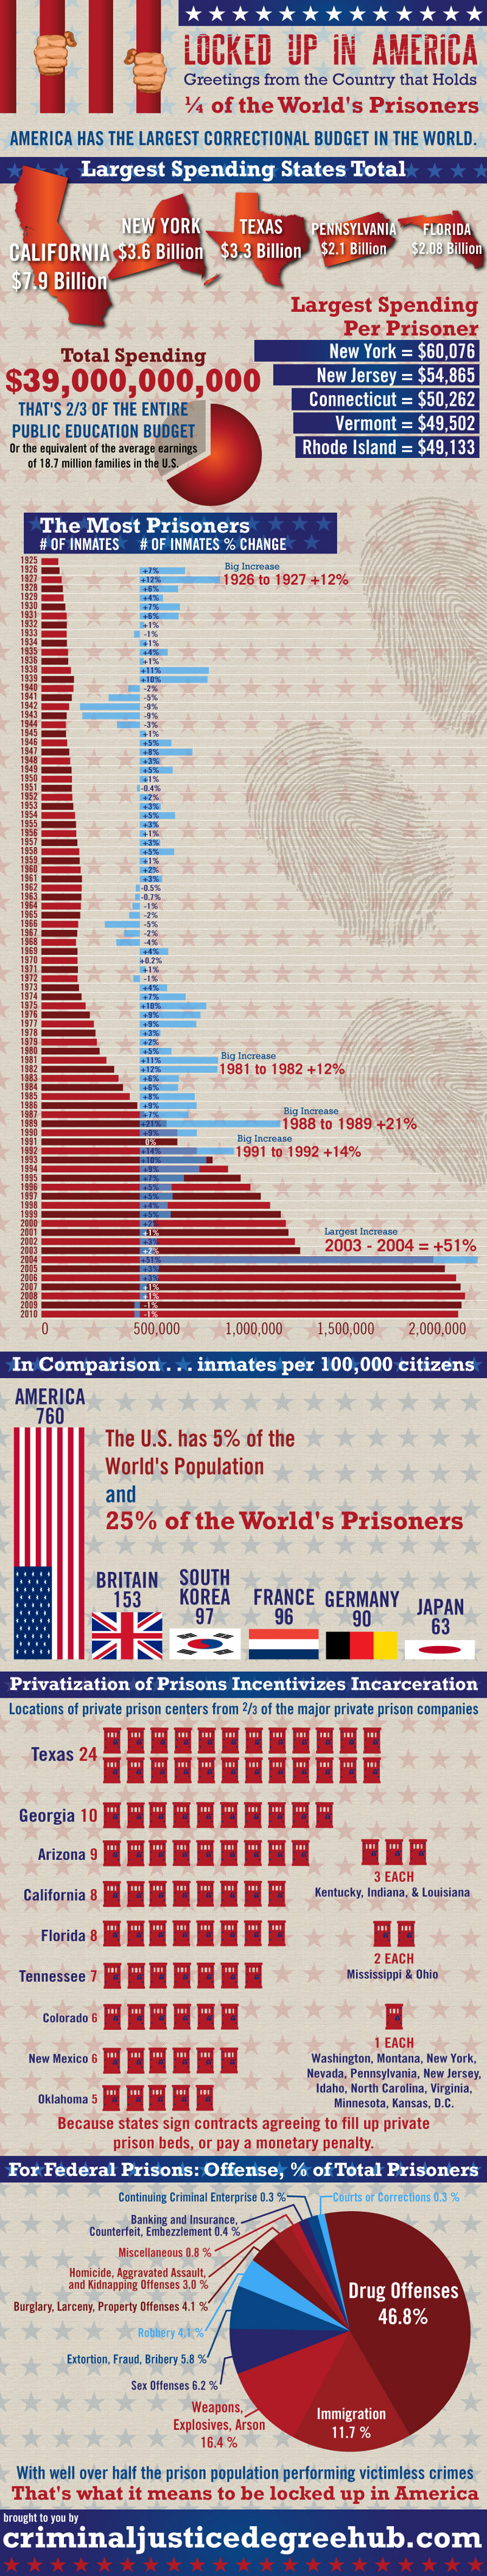 Prison Population in the US